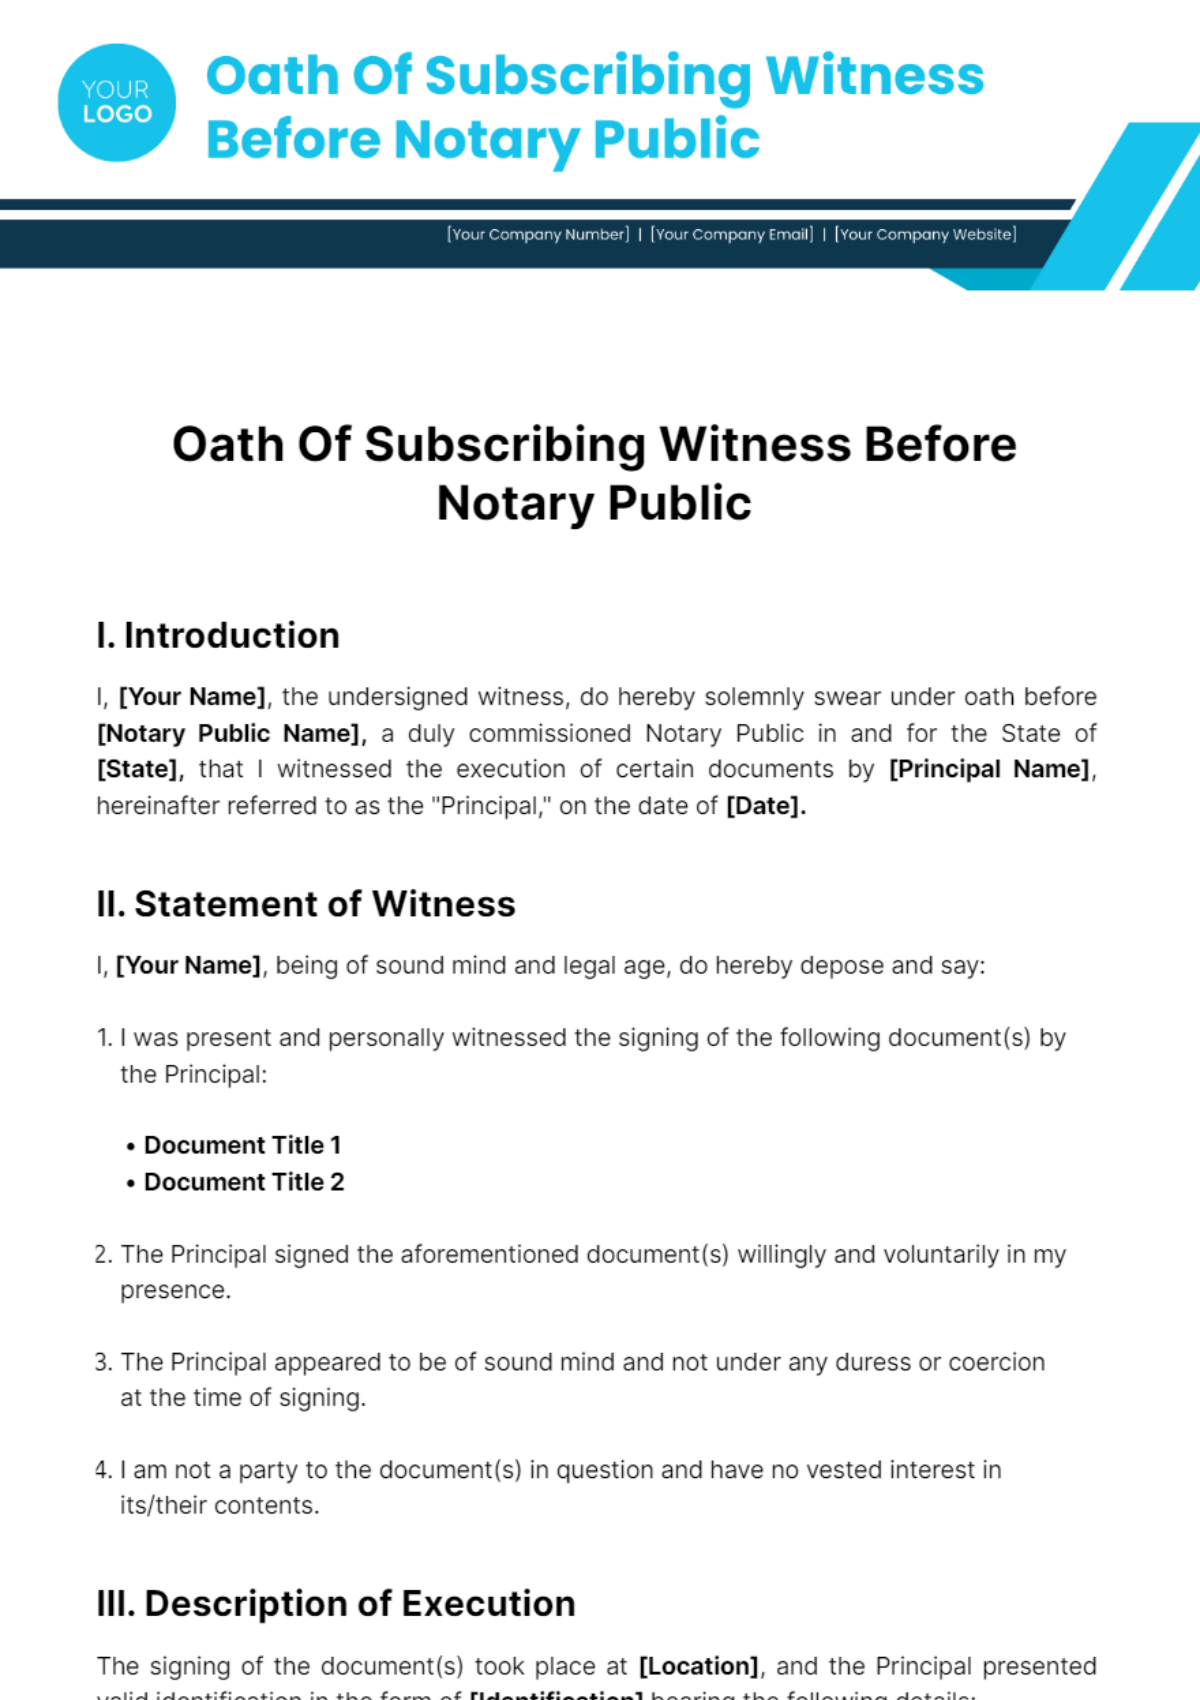 Oath Of Subscribing Witness Before Notary Public Template